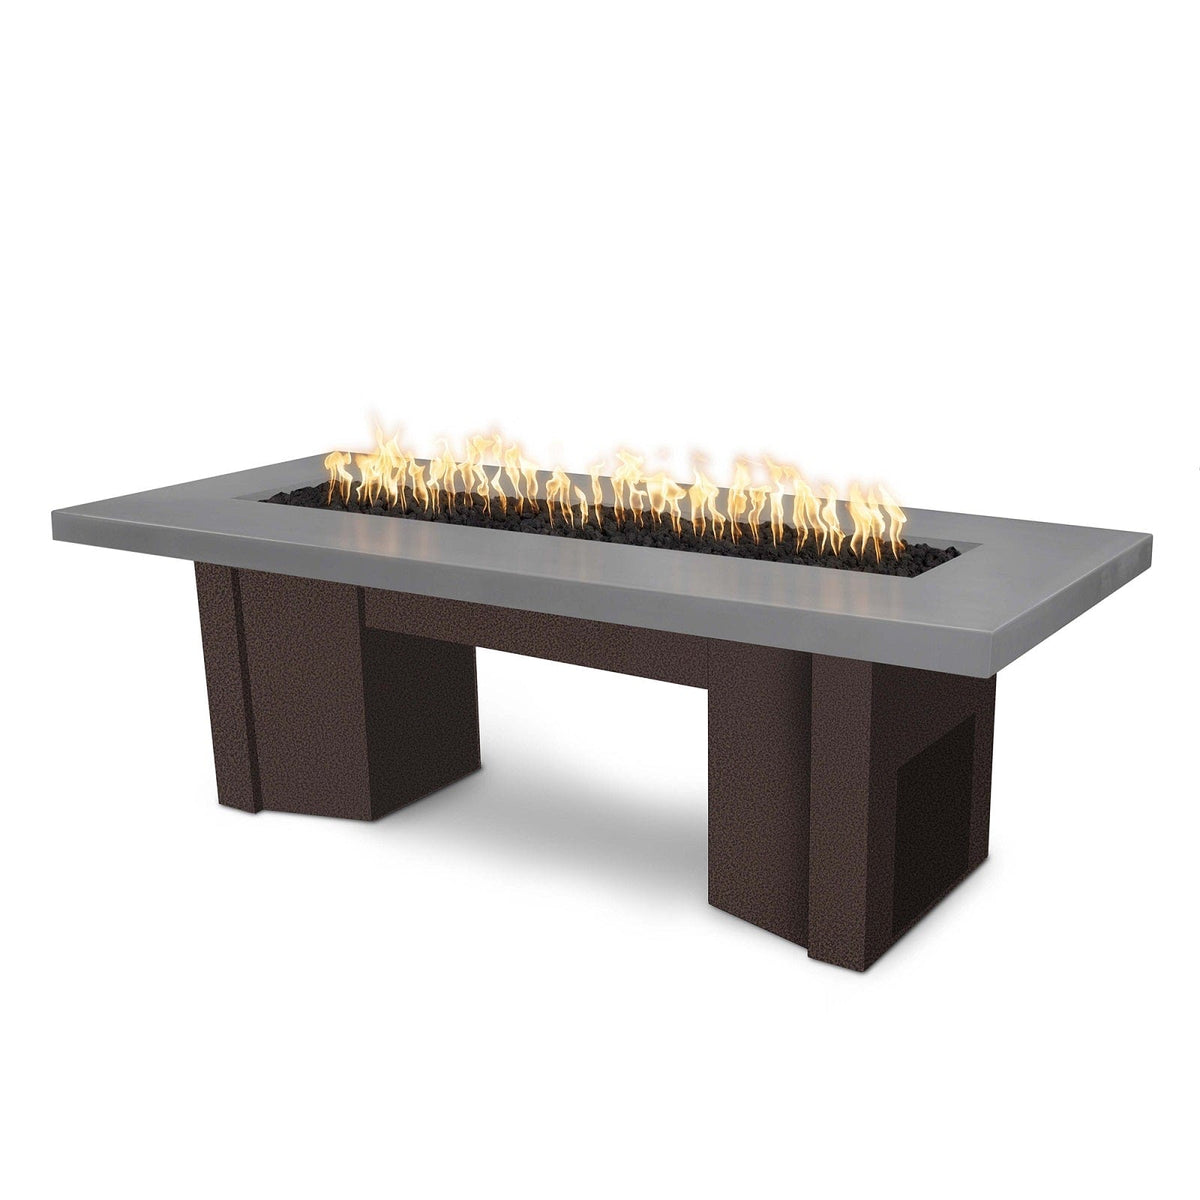 The Outdoor Plus Fire Features Natural Gray (-NGY) / Copper Vein Powder Coated Steel (-CPV) The Outdoor Plus 60&quot; Alameda Fire Table Smooth Concrete in Natural Gas - Match Lit / OPT-ALMGFRC60-NG